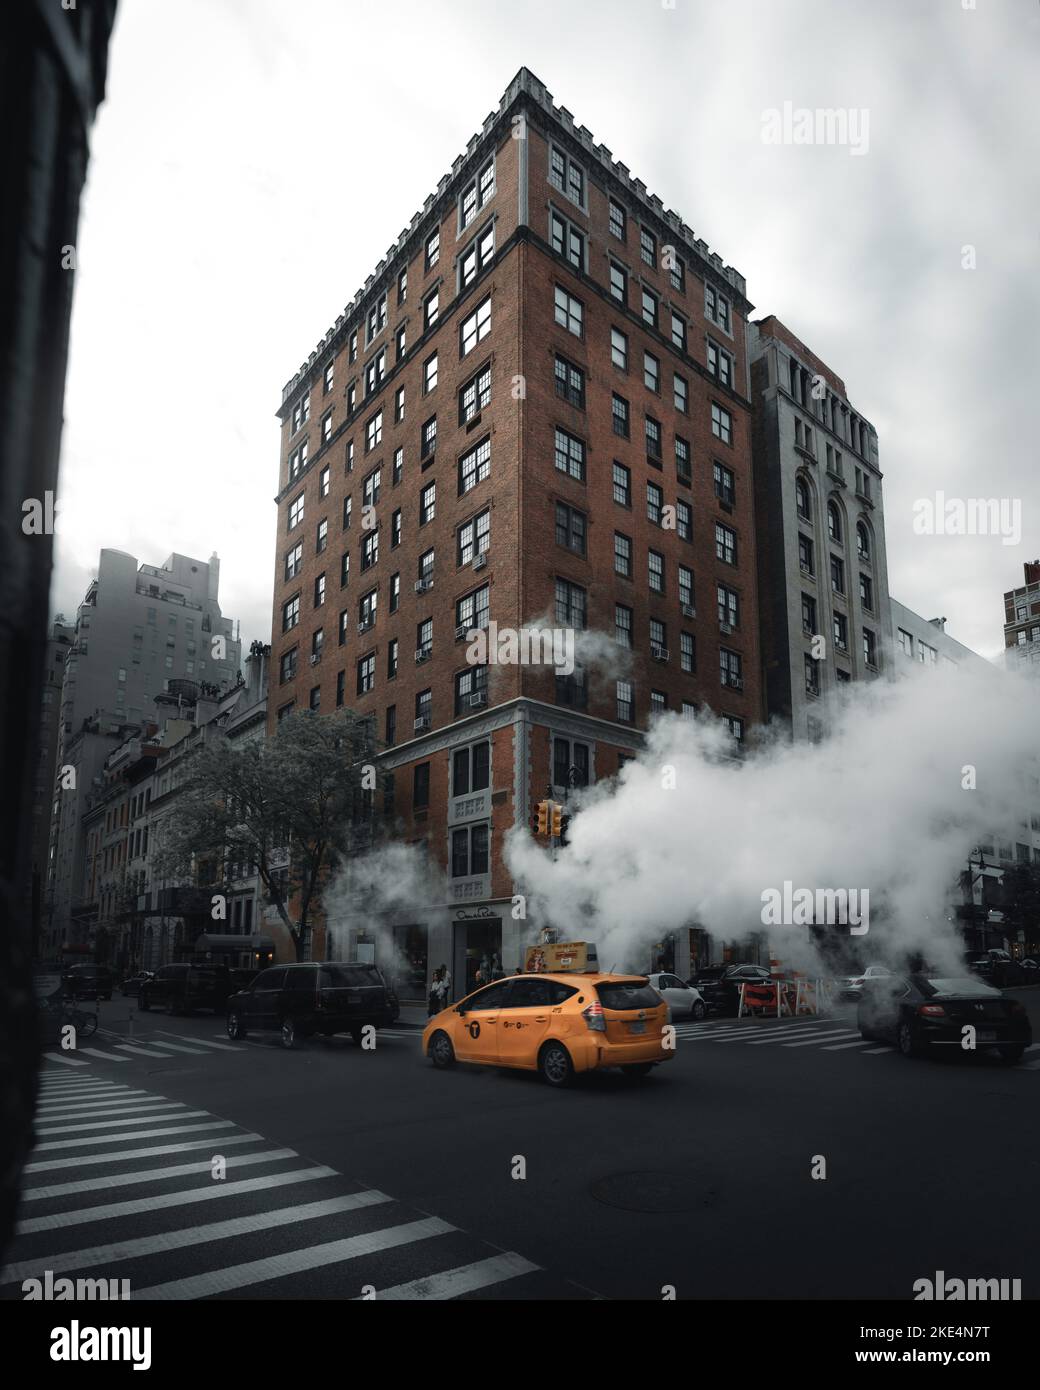 A high rise building in midtown manhattan and a yellow cab passing in on the intersection in front of it with steam coming out of a manhole cover Stock Photo